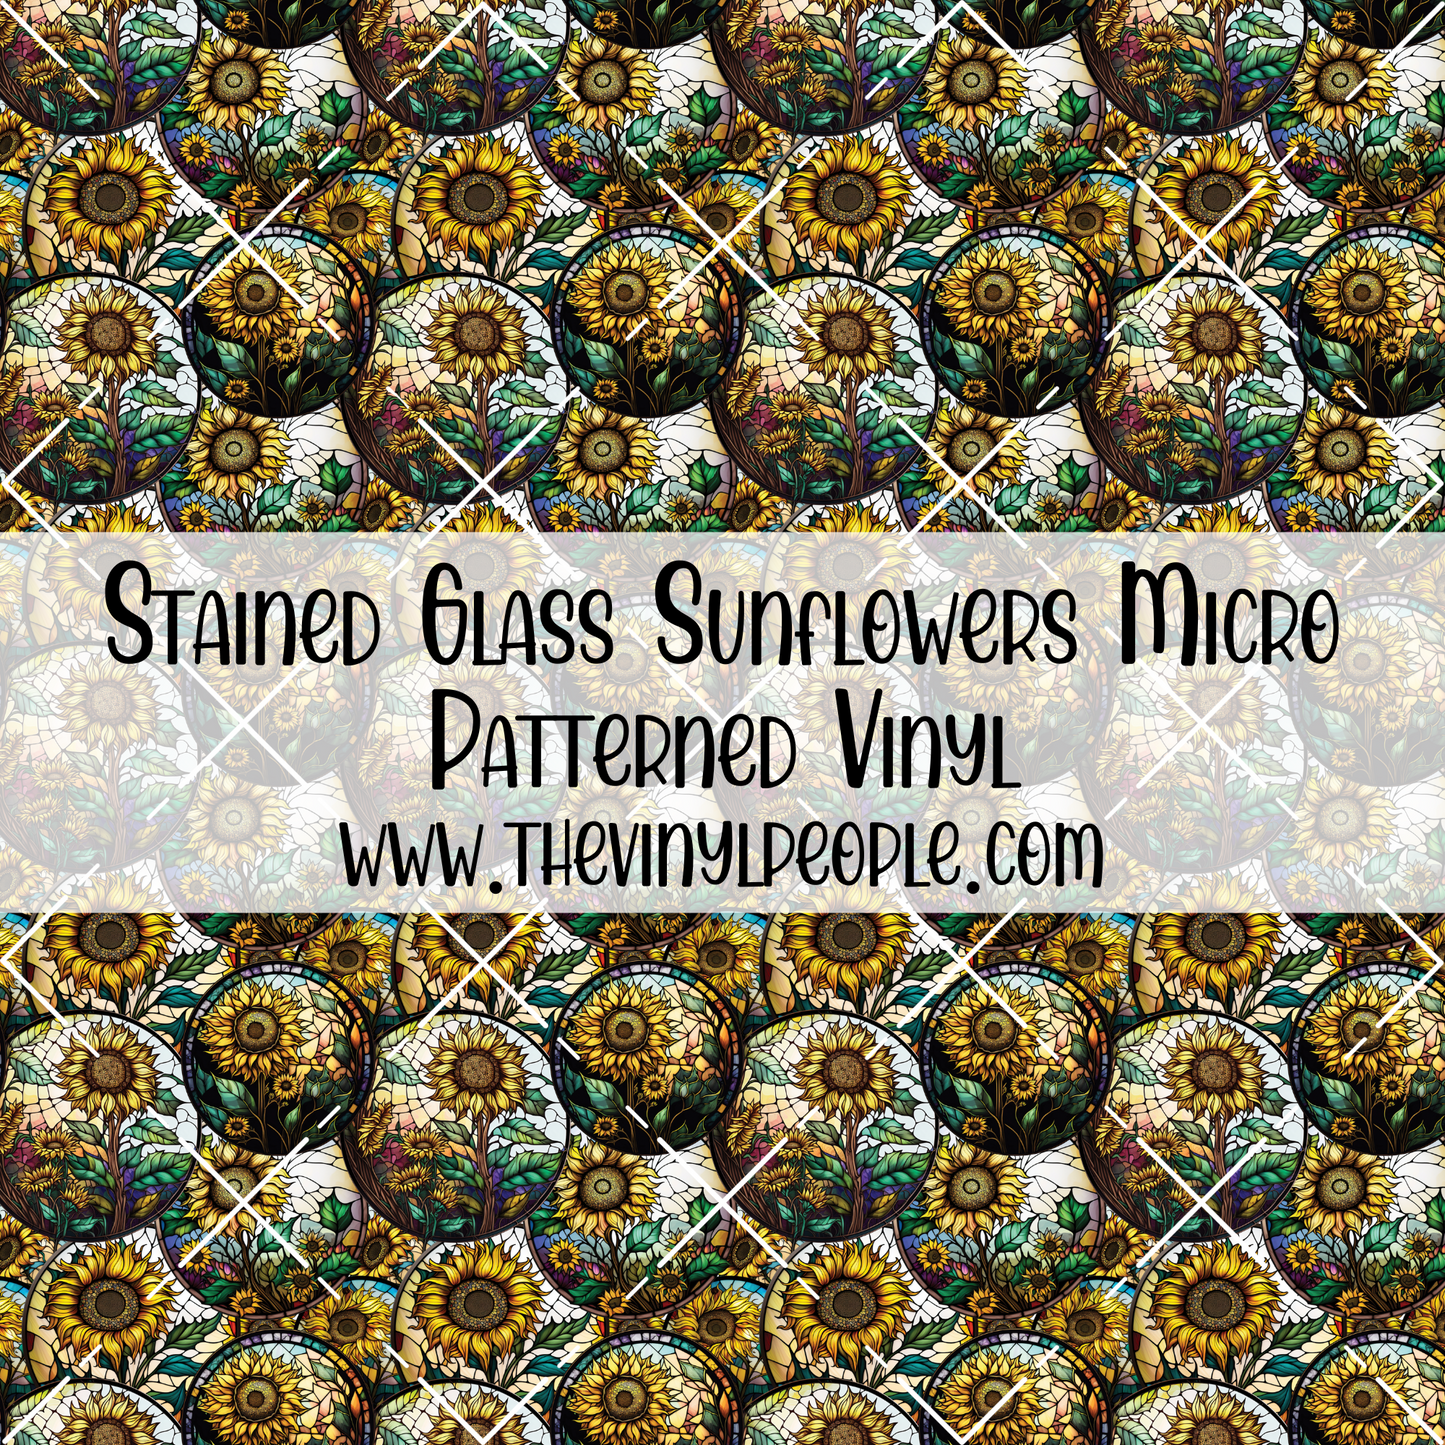 Stained Glass Sunflowers Patterned Vinyl